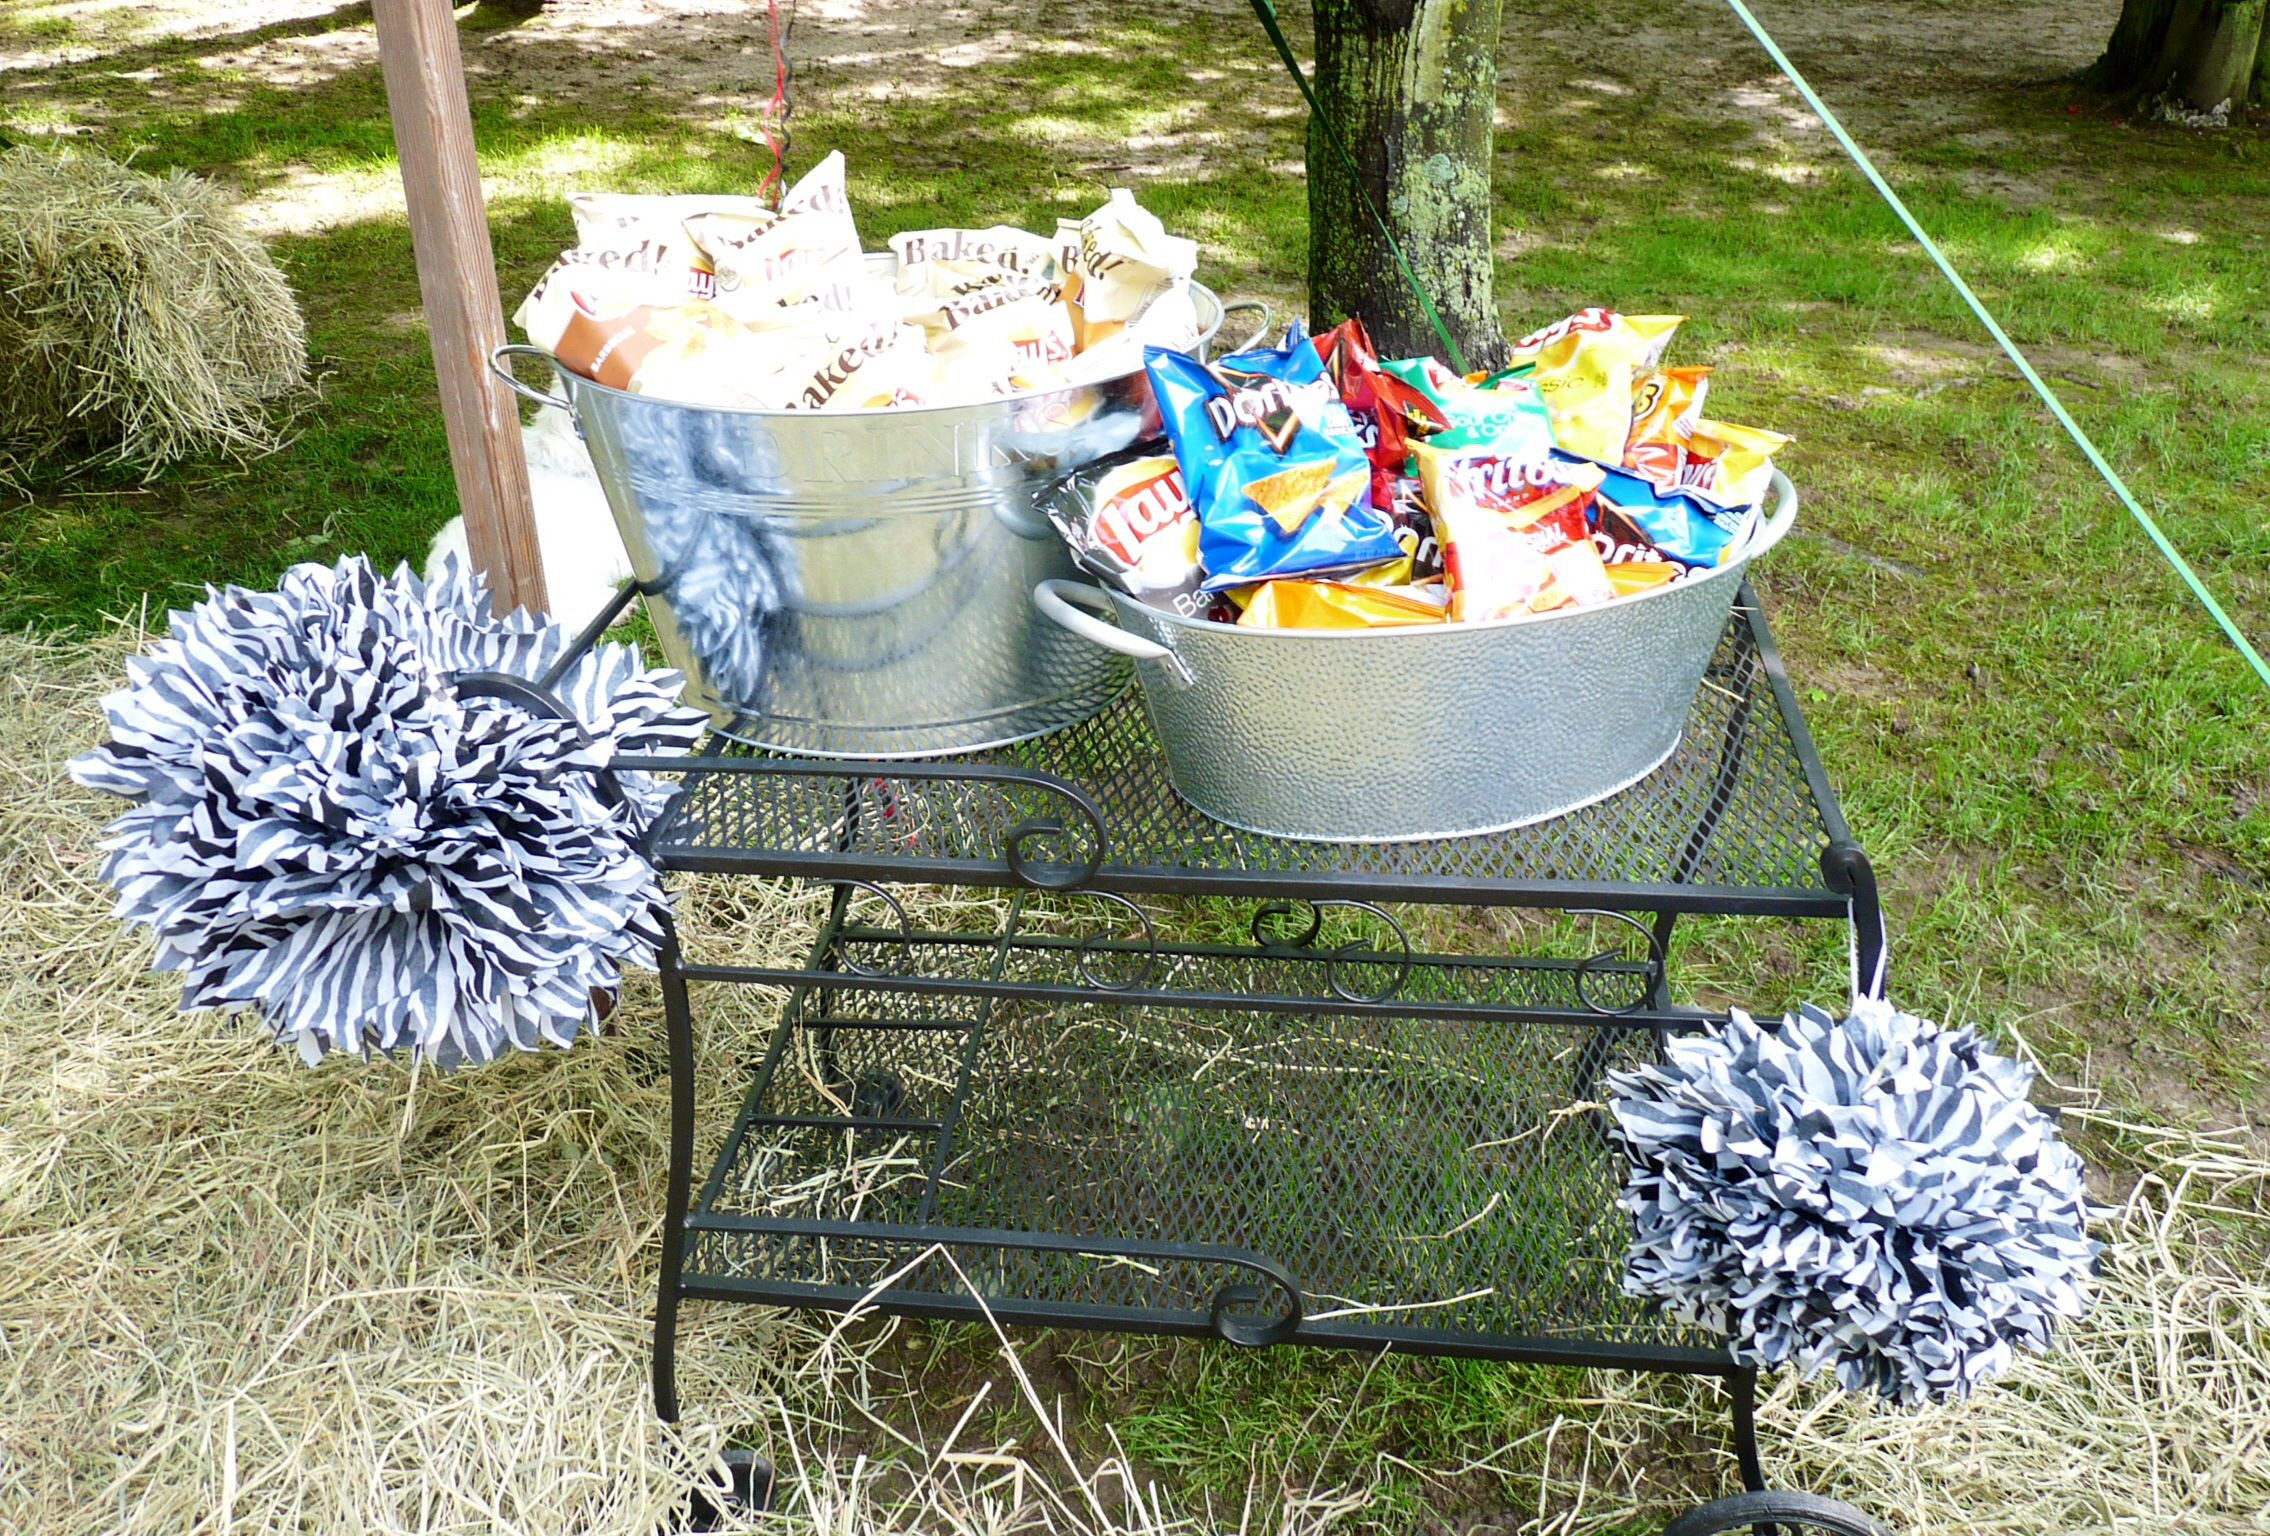 Pinterest Backyard Graduation Party Ideas
 Chip station for the outdoor graduation party